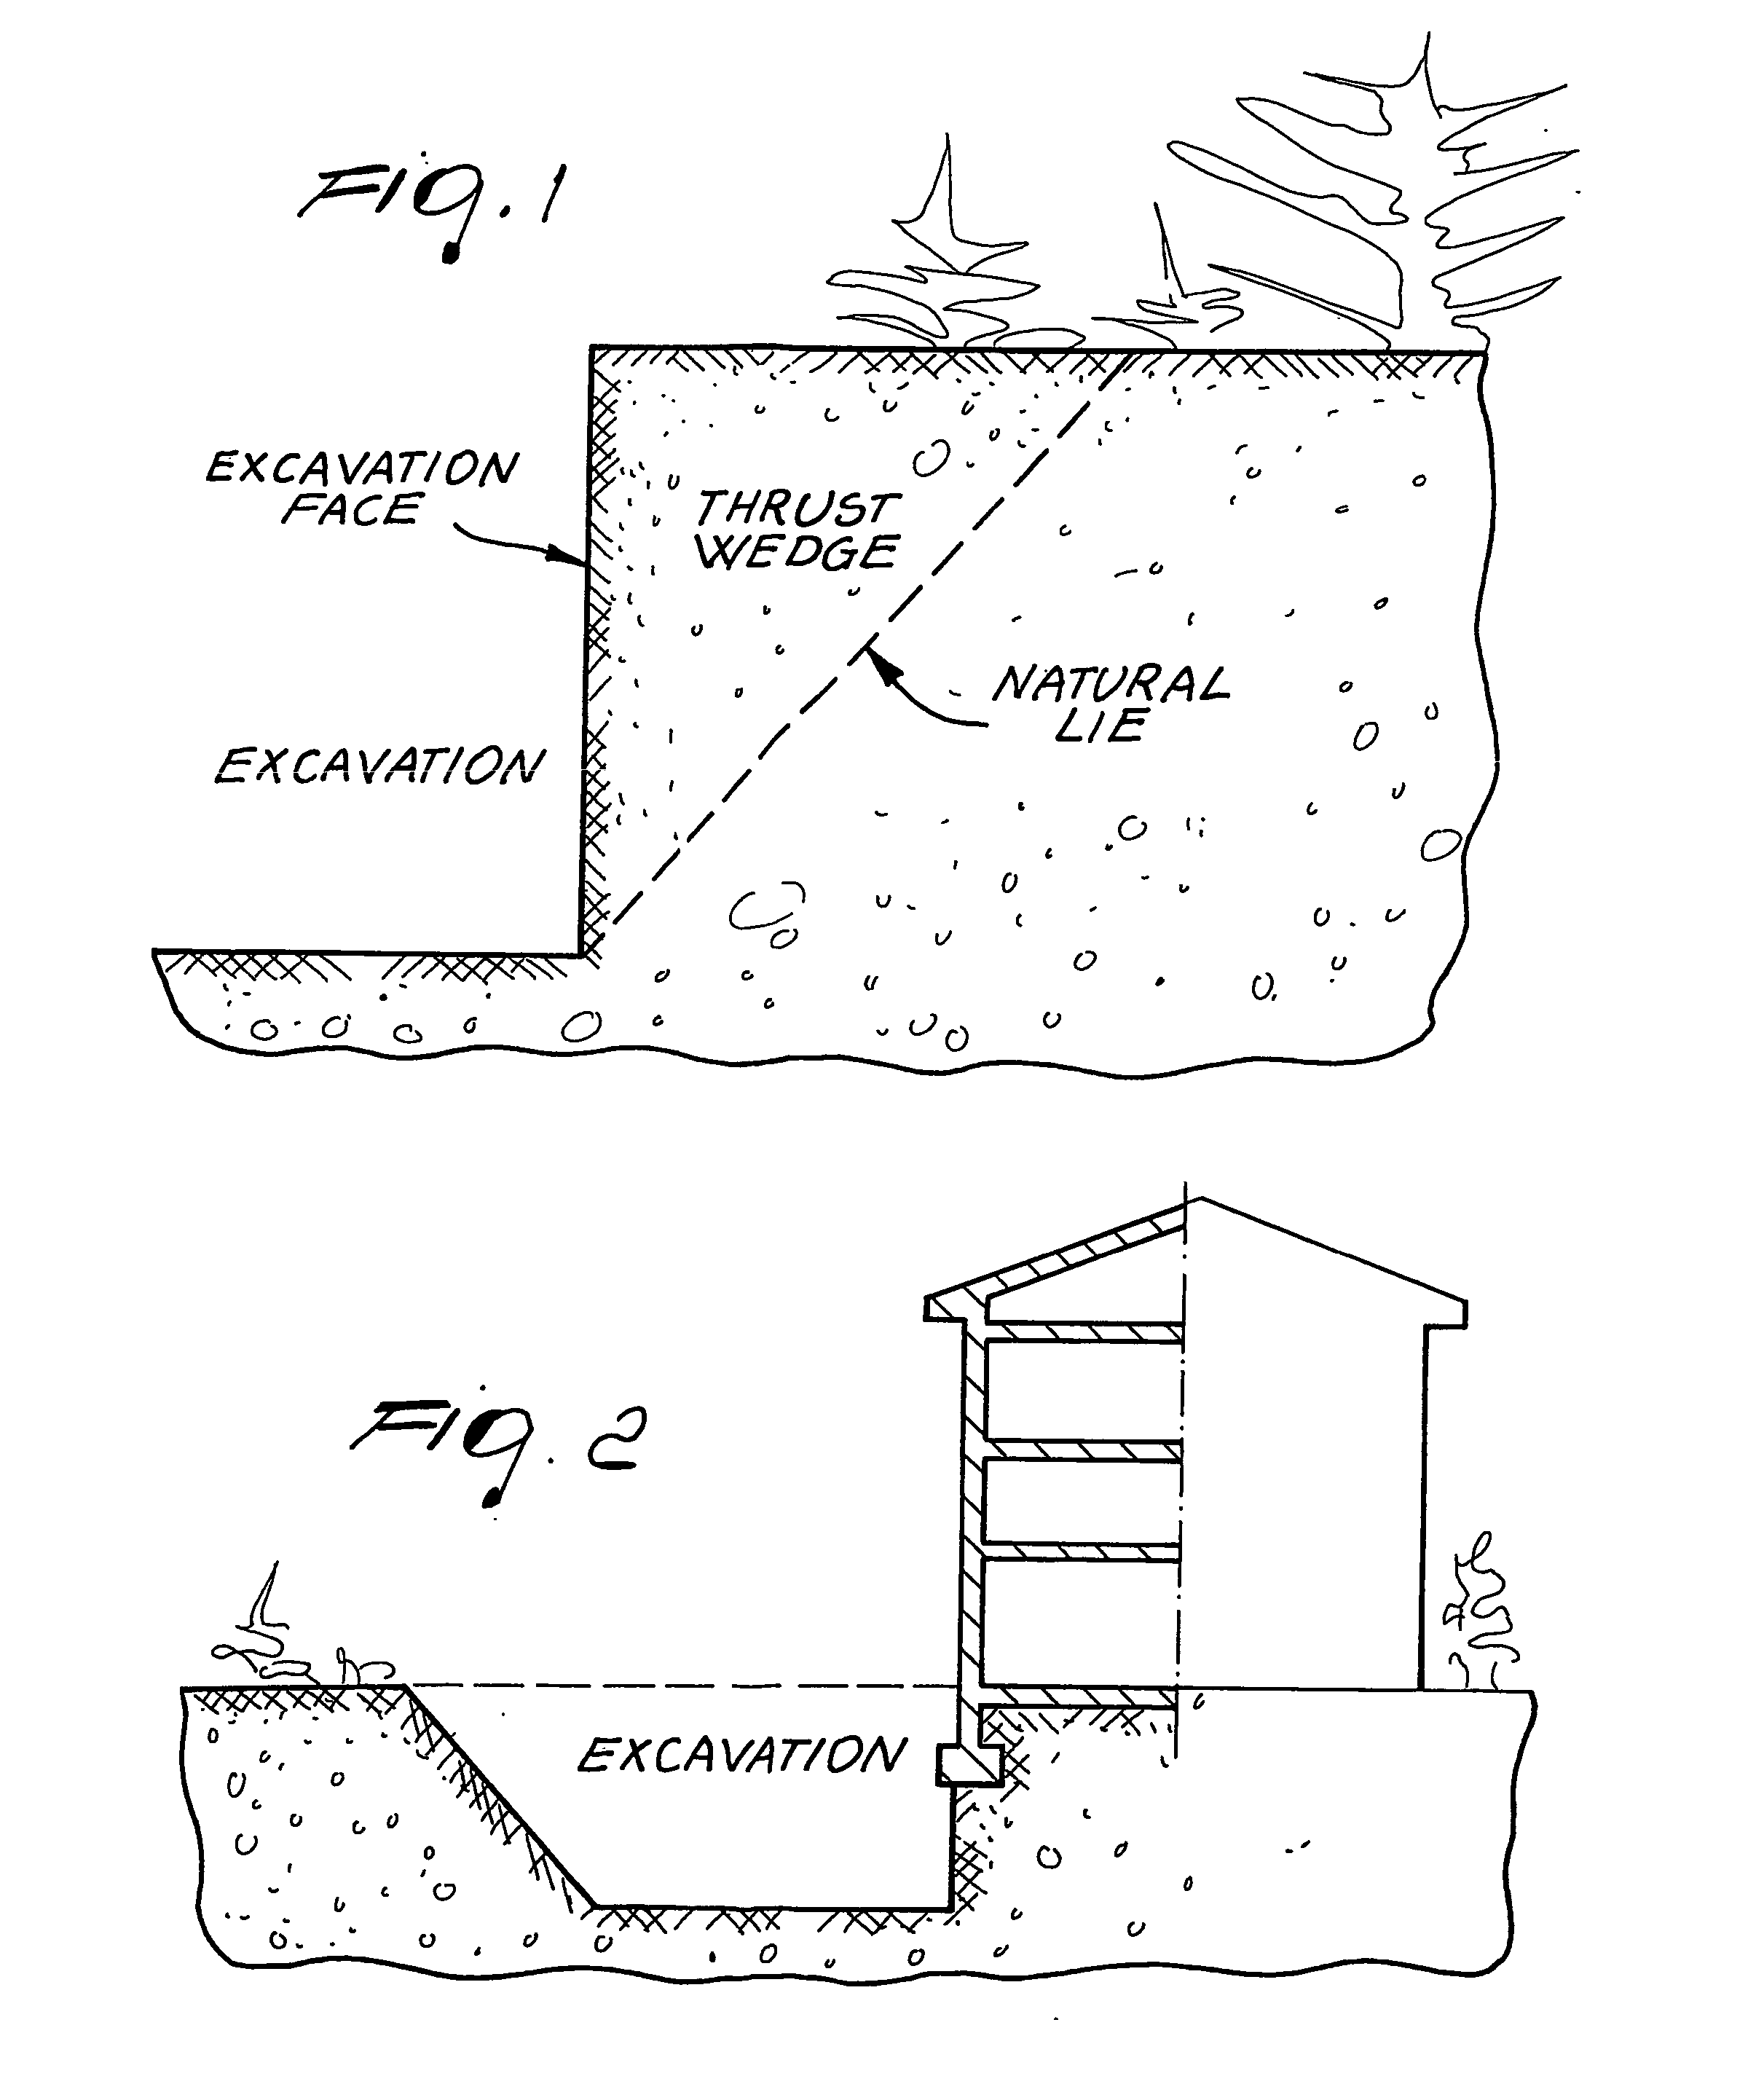 Method for increasing the strength of a volume of soil, particularly for containing and supporting excavation faces